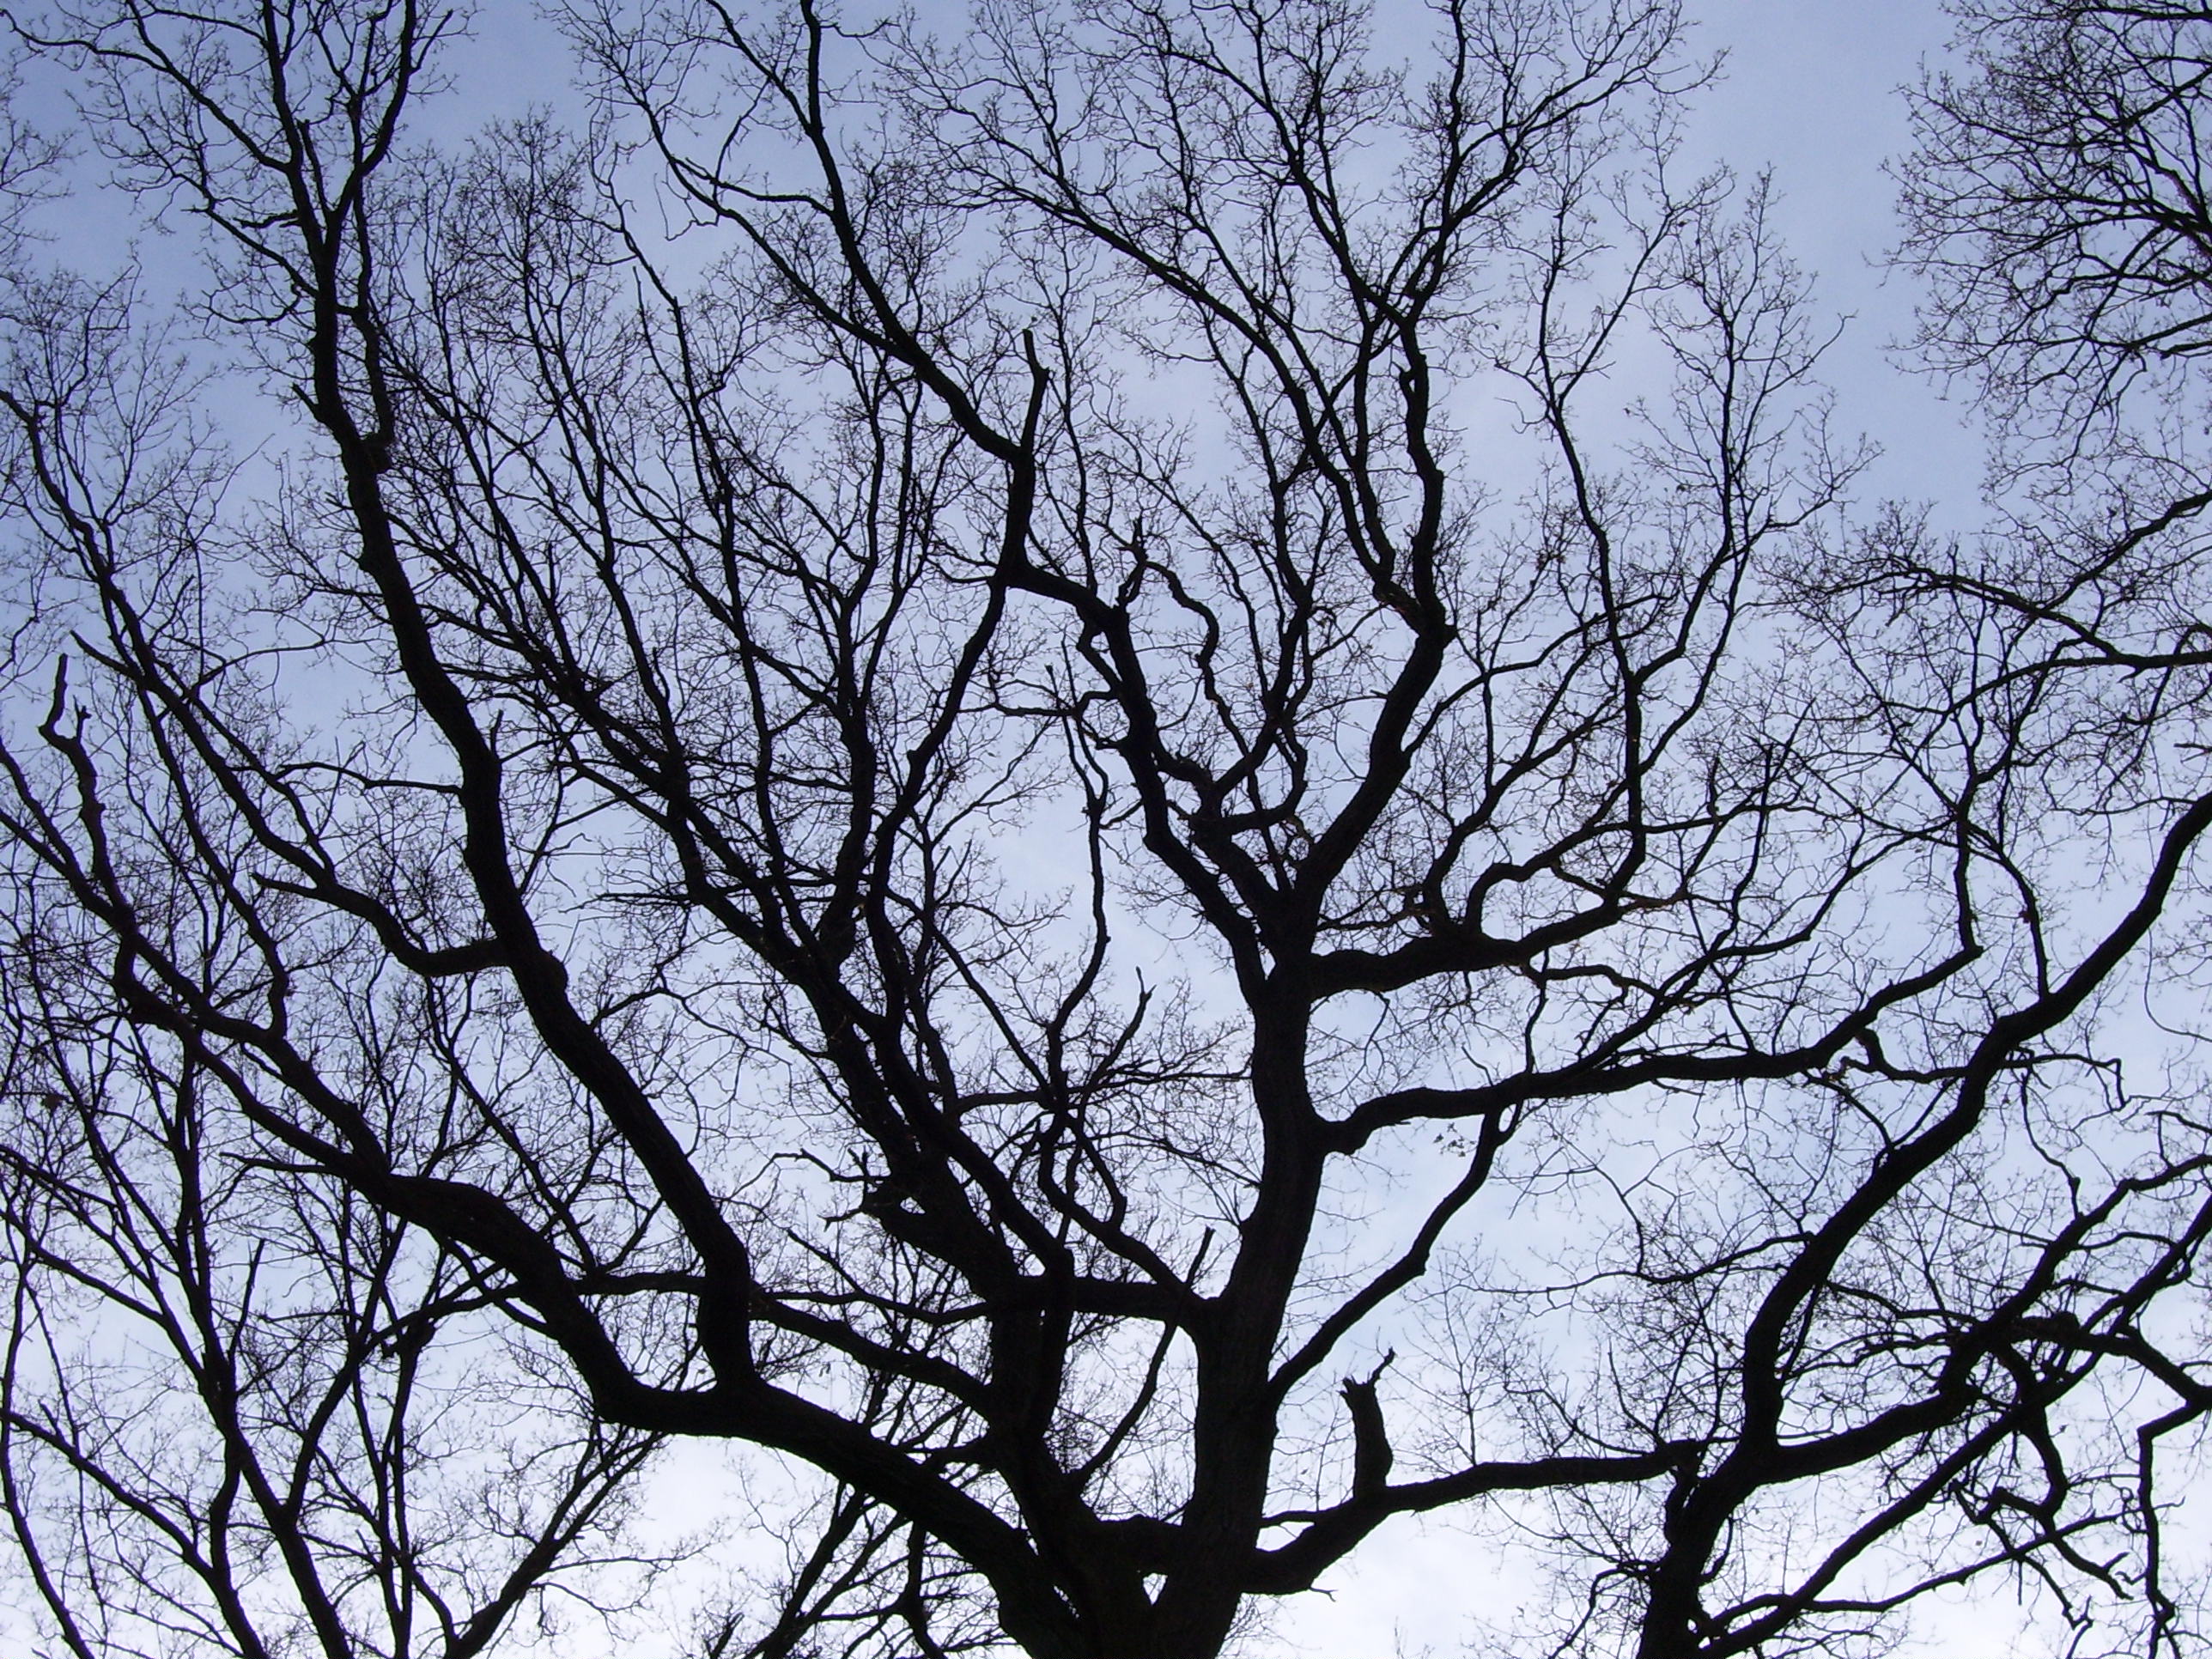 File:Branches of a tree.JPG - Wikimedia Commons